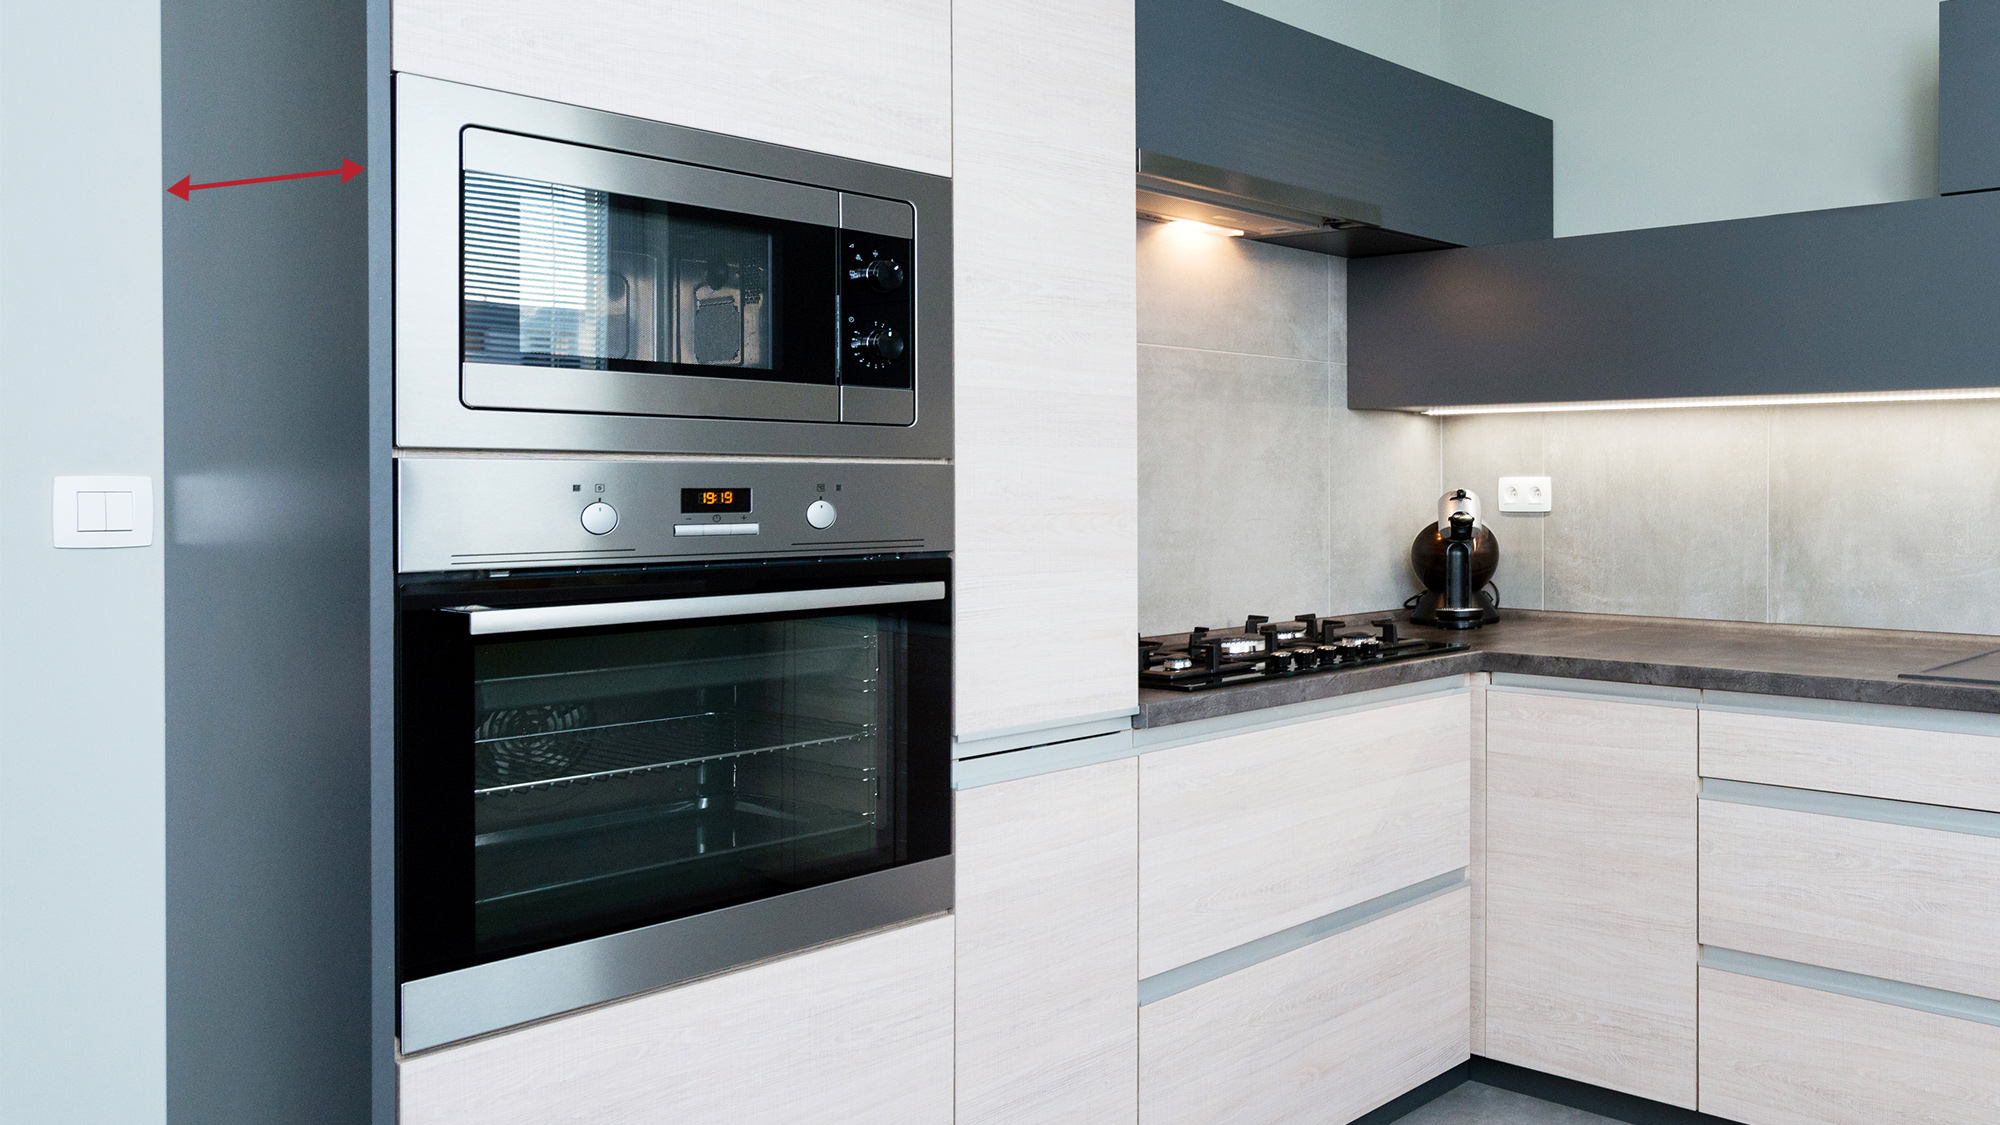 7 Space-Saving Ways to Integrate a Microwave in the Kitchen